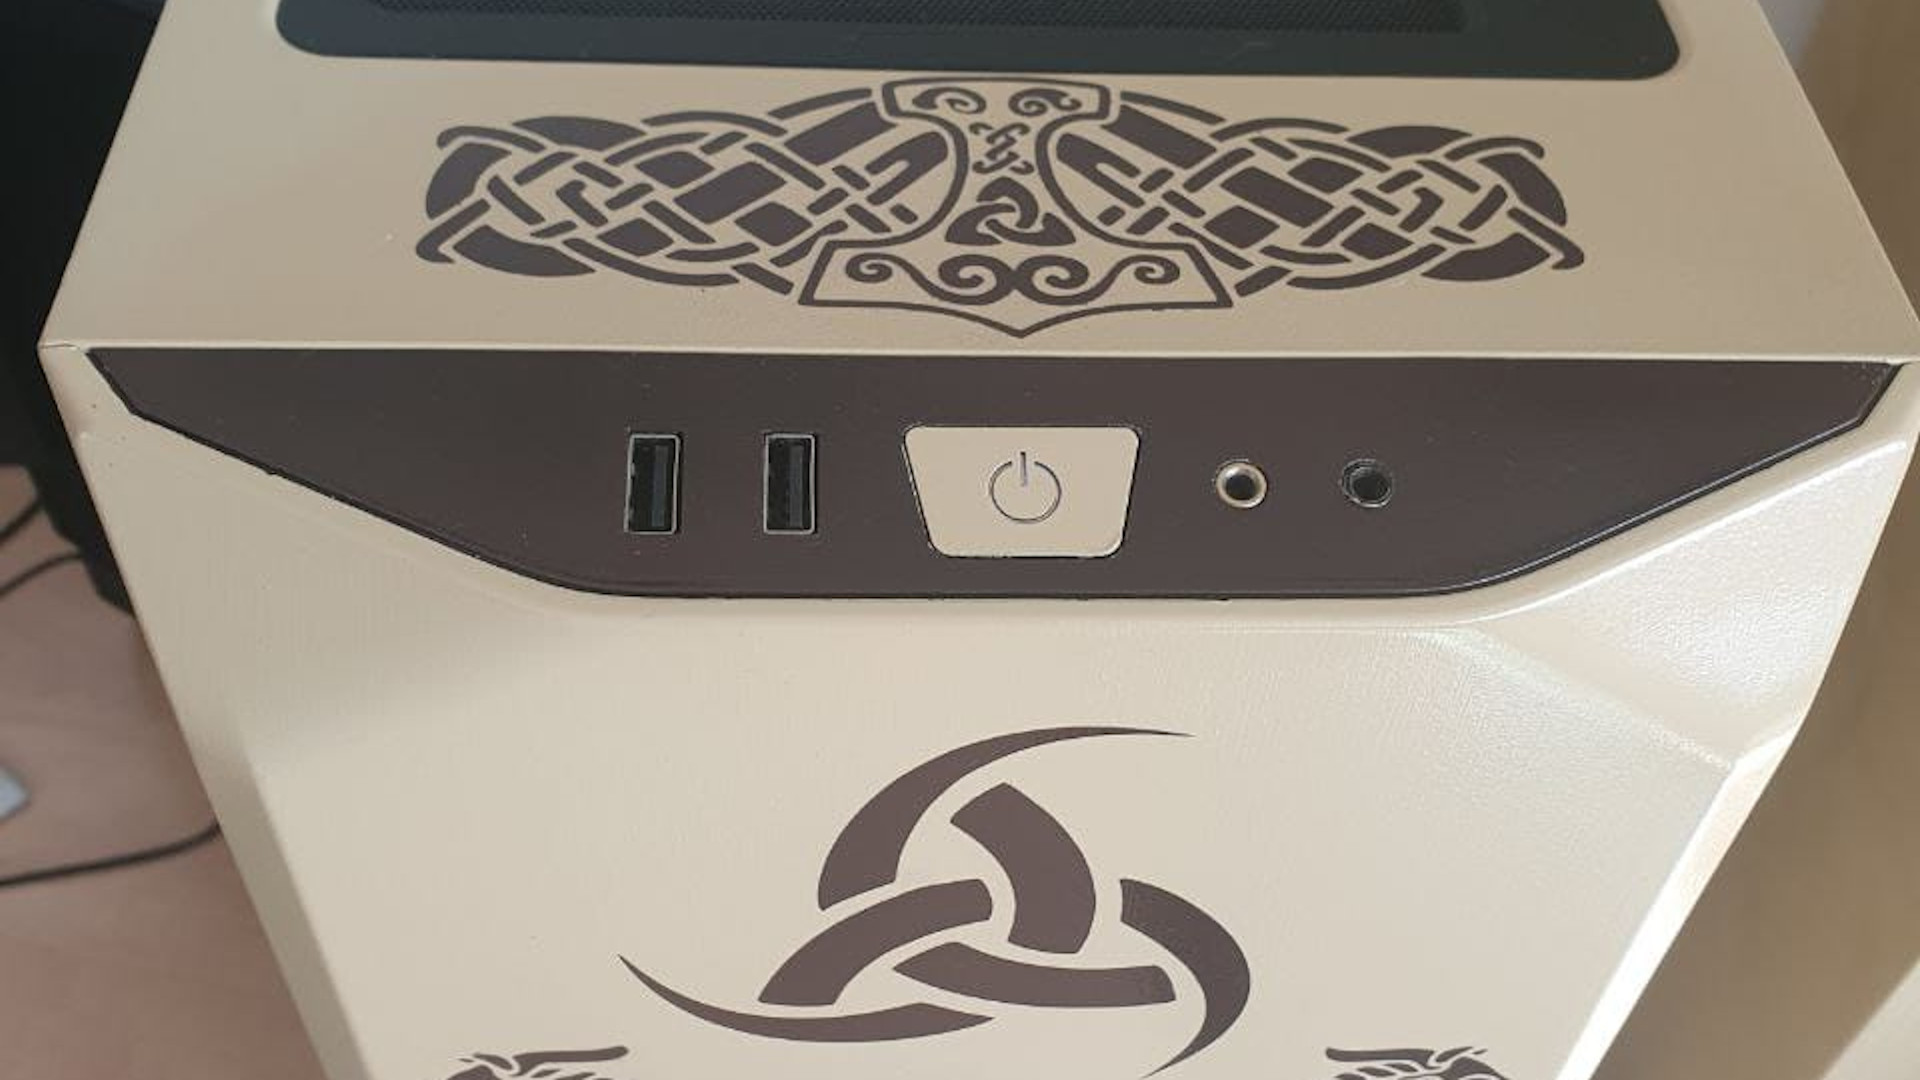 The front panel of the custom PC case which has a viking theme